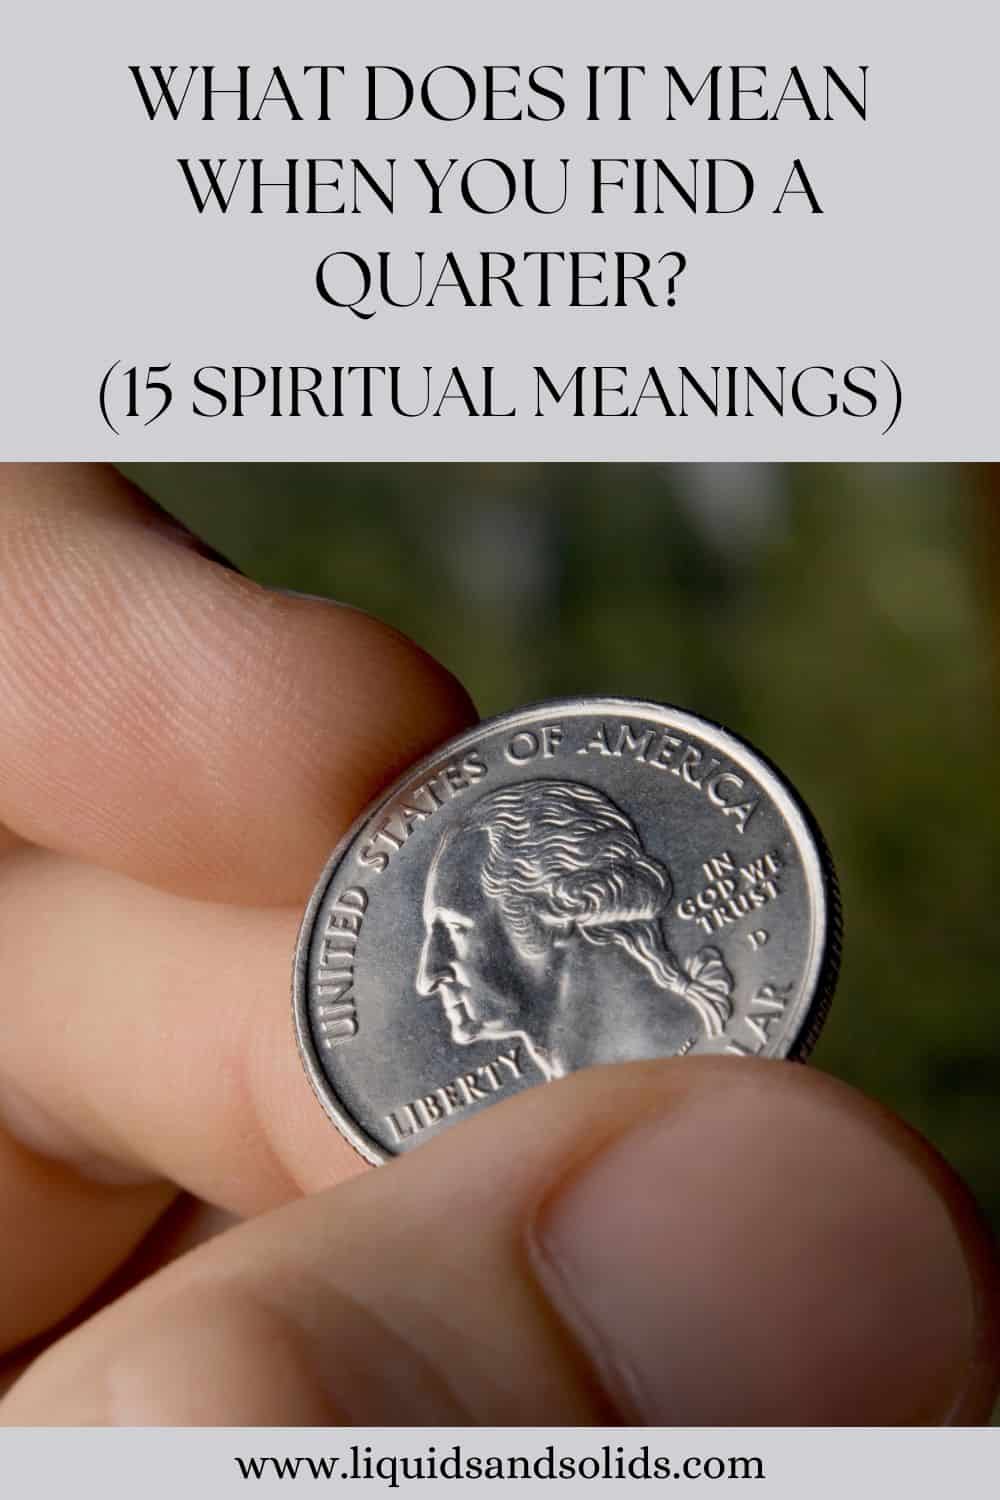 What Does It Mean When You Find A Quarter? (15 Spiritual Meanings)